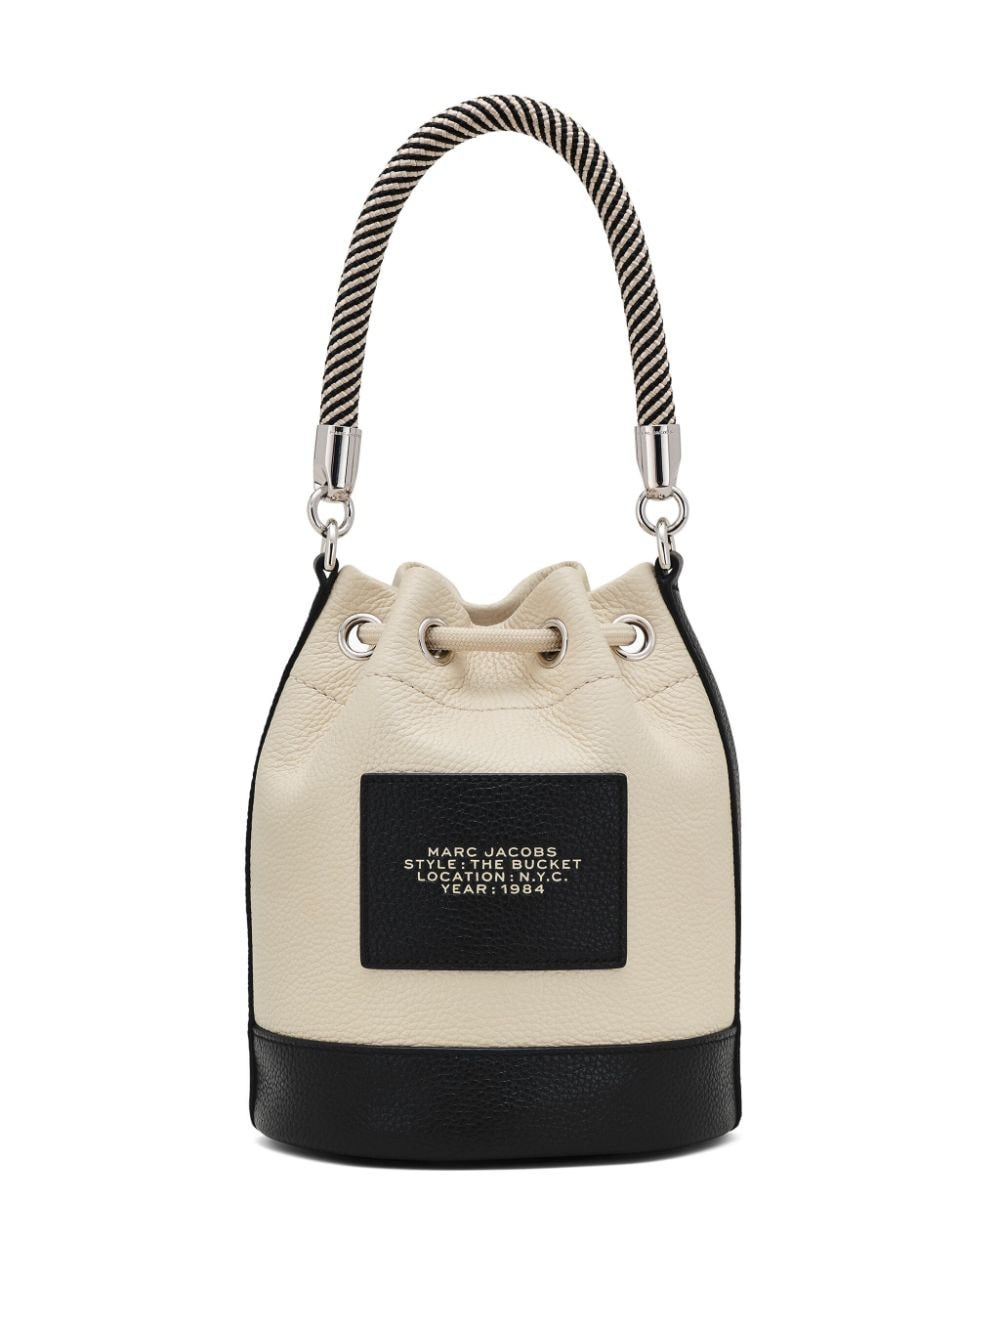 THE COLOUR-BLOCK LEATHER BUCKET BAG